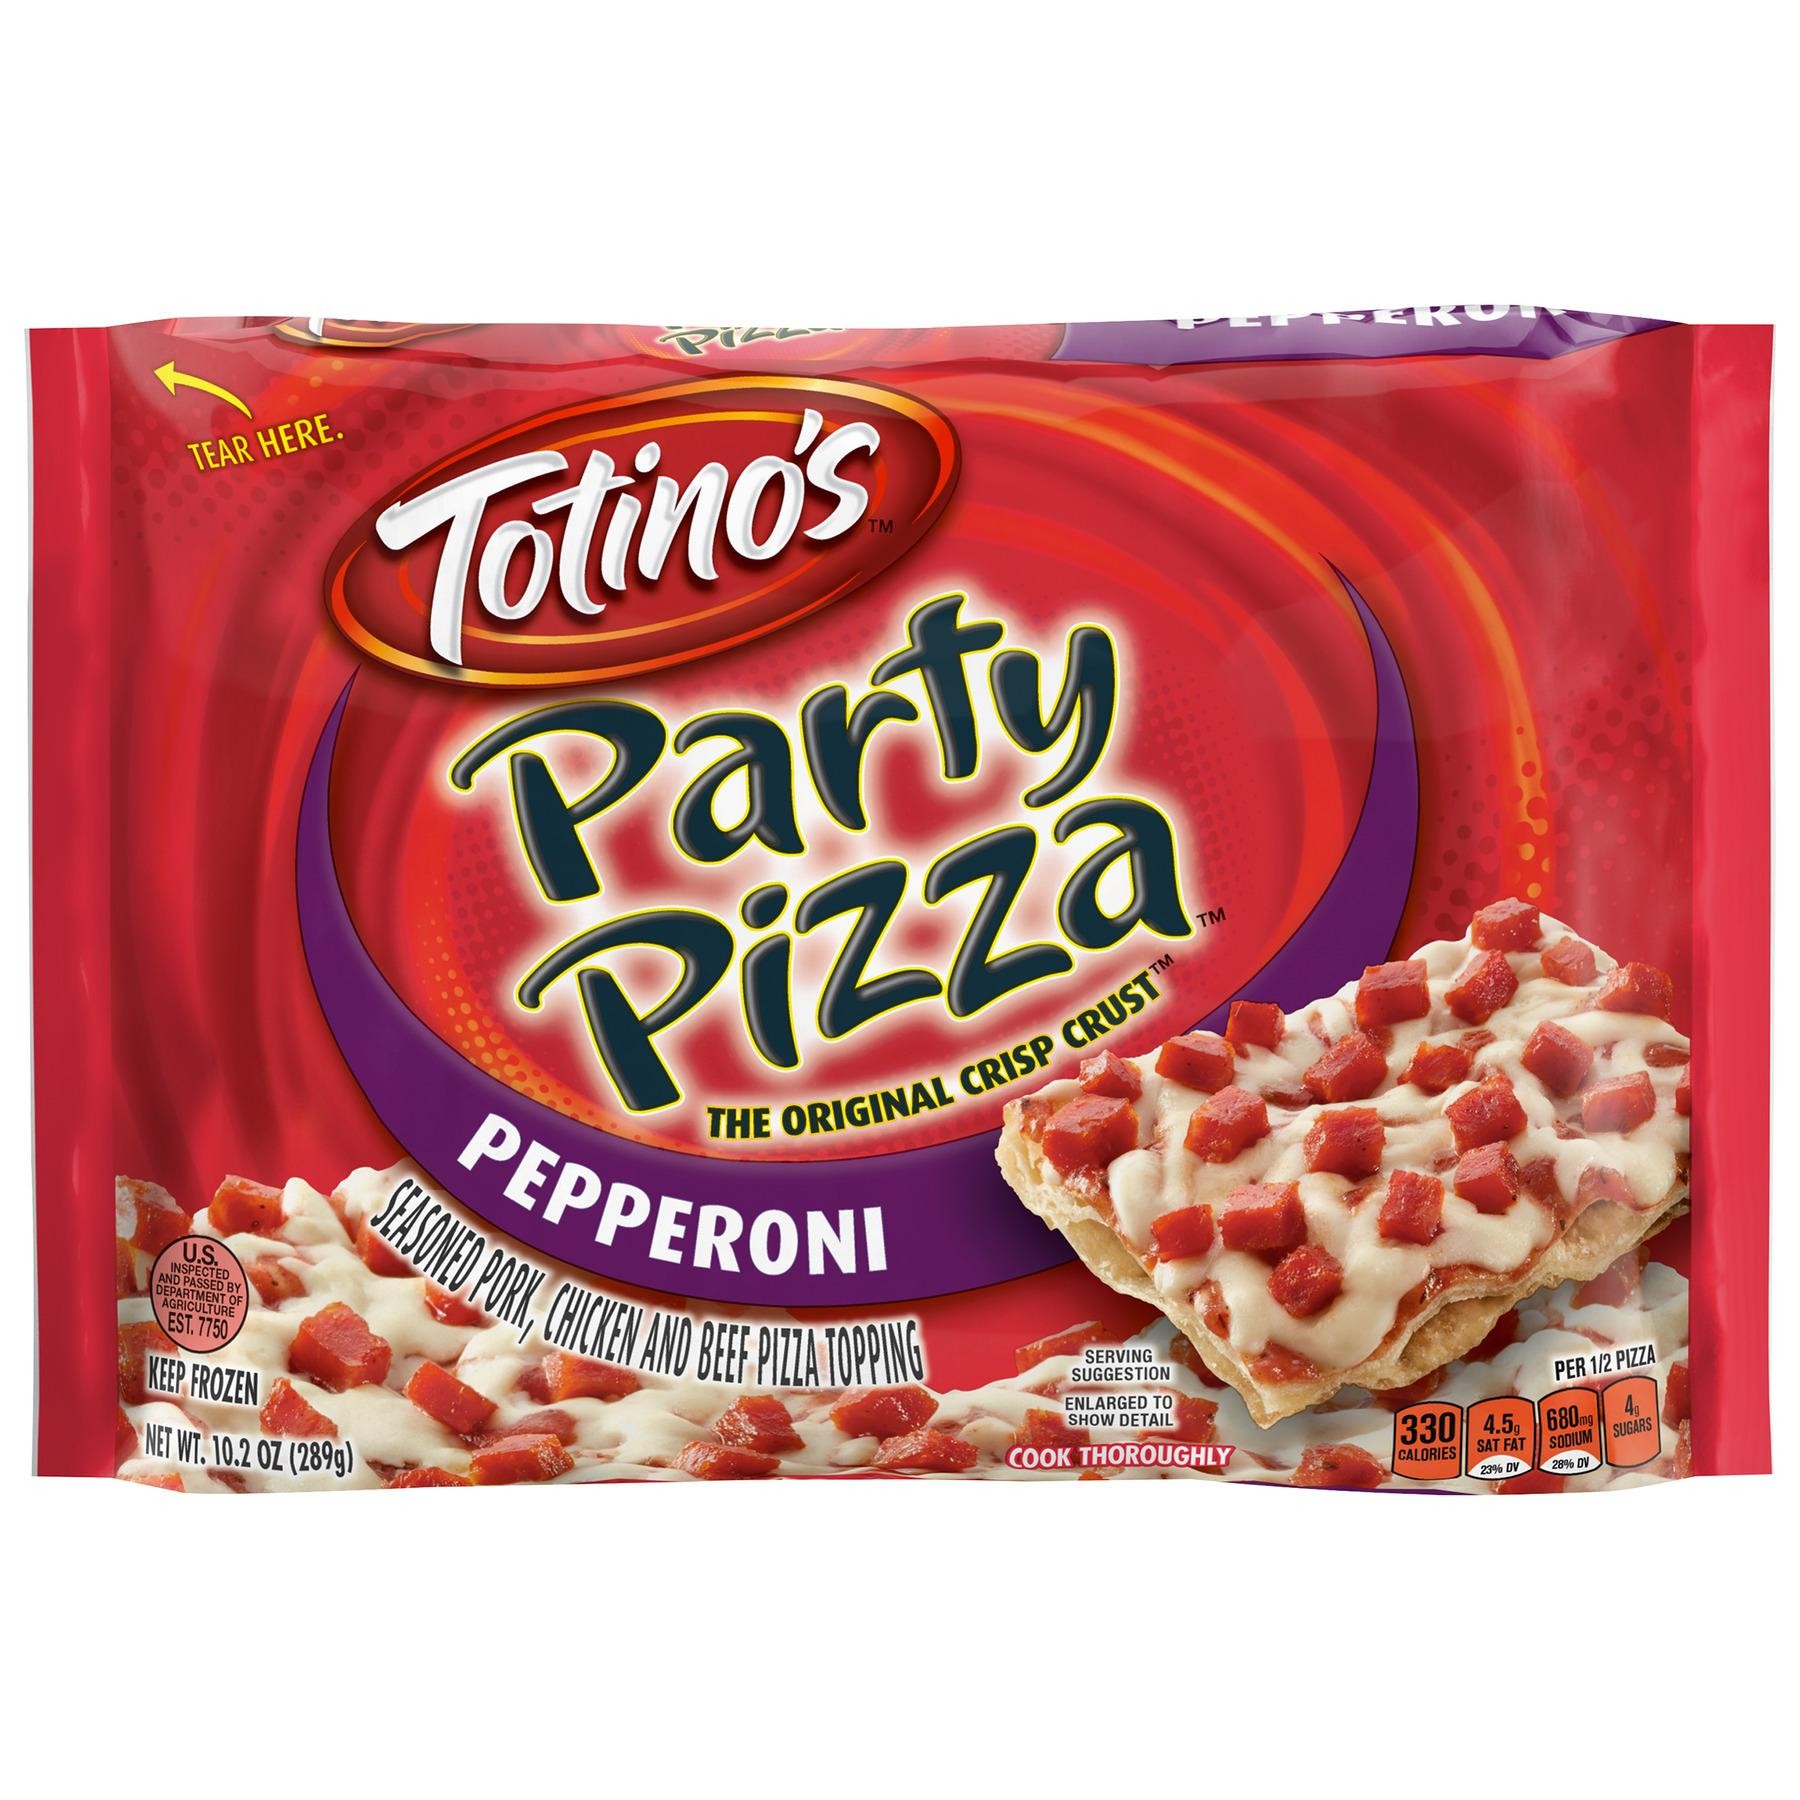 Party Pizza